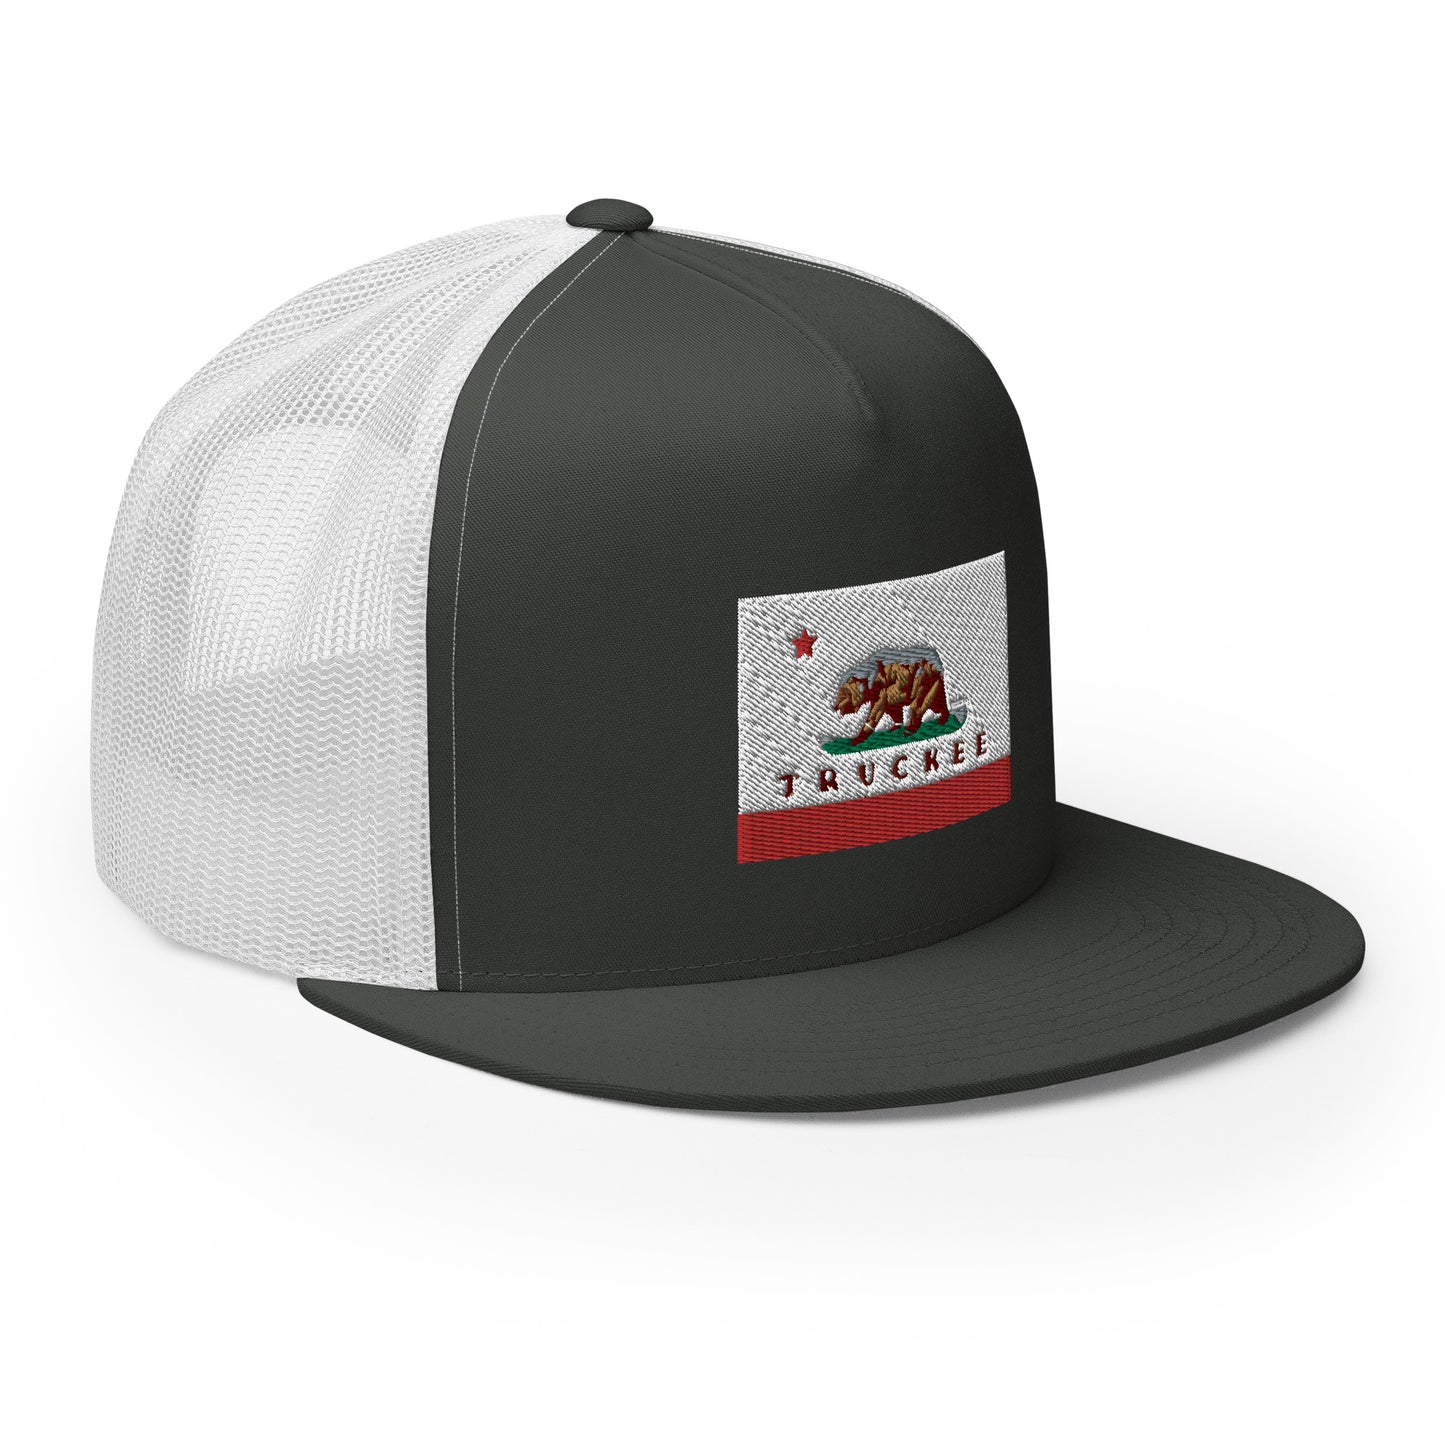 charcoal and white snapback truckee hat